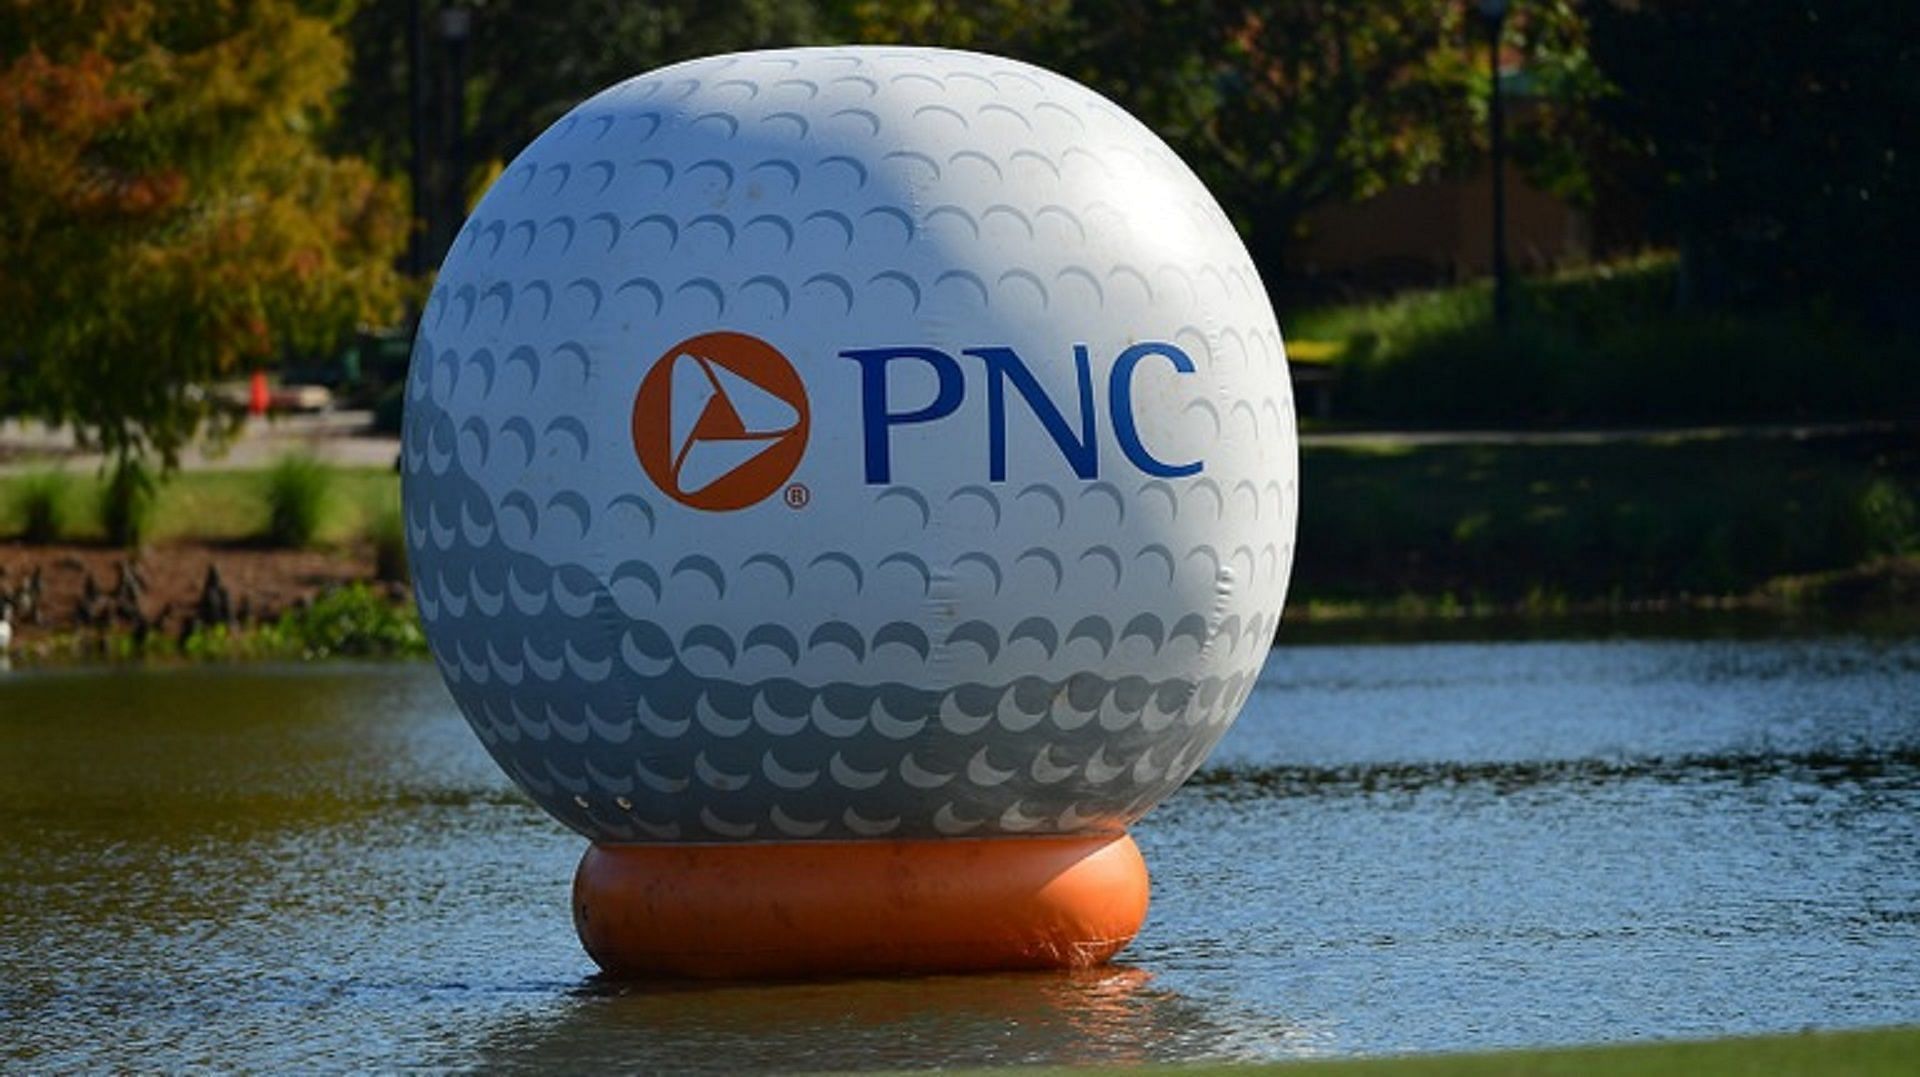 The PNC Championship will commence on Thursday, December 14 